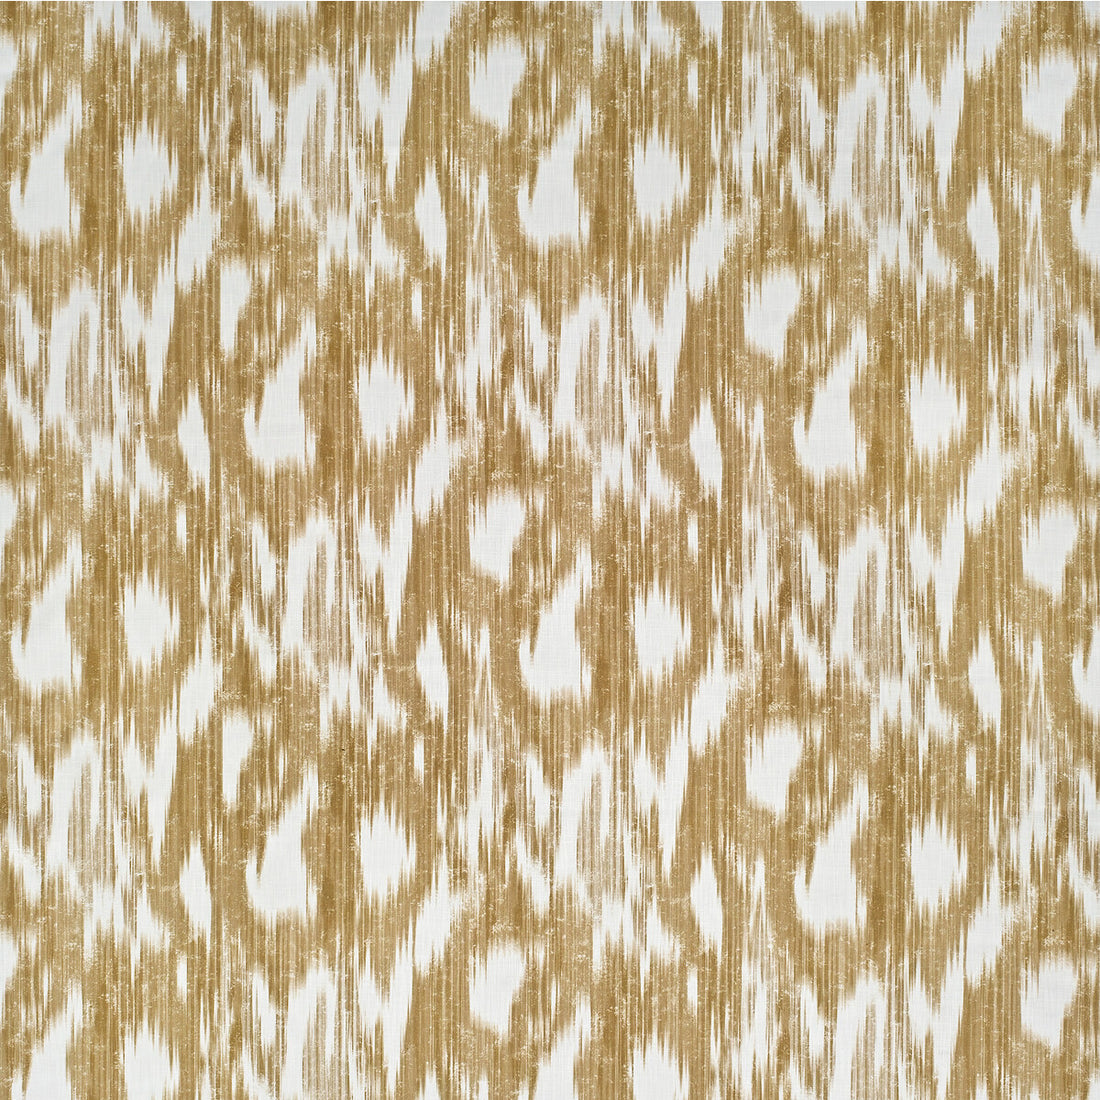 Apulia Outdoor fabric in ochre color - pattern AM100385.4.0 - by Kravet Couture in the Andrew Martin Sophie Patterson Outdoor collection